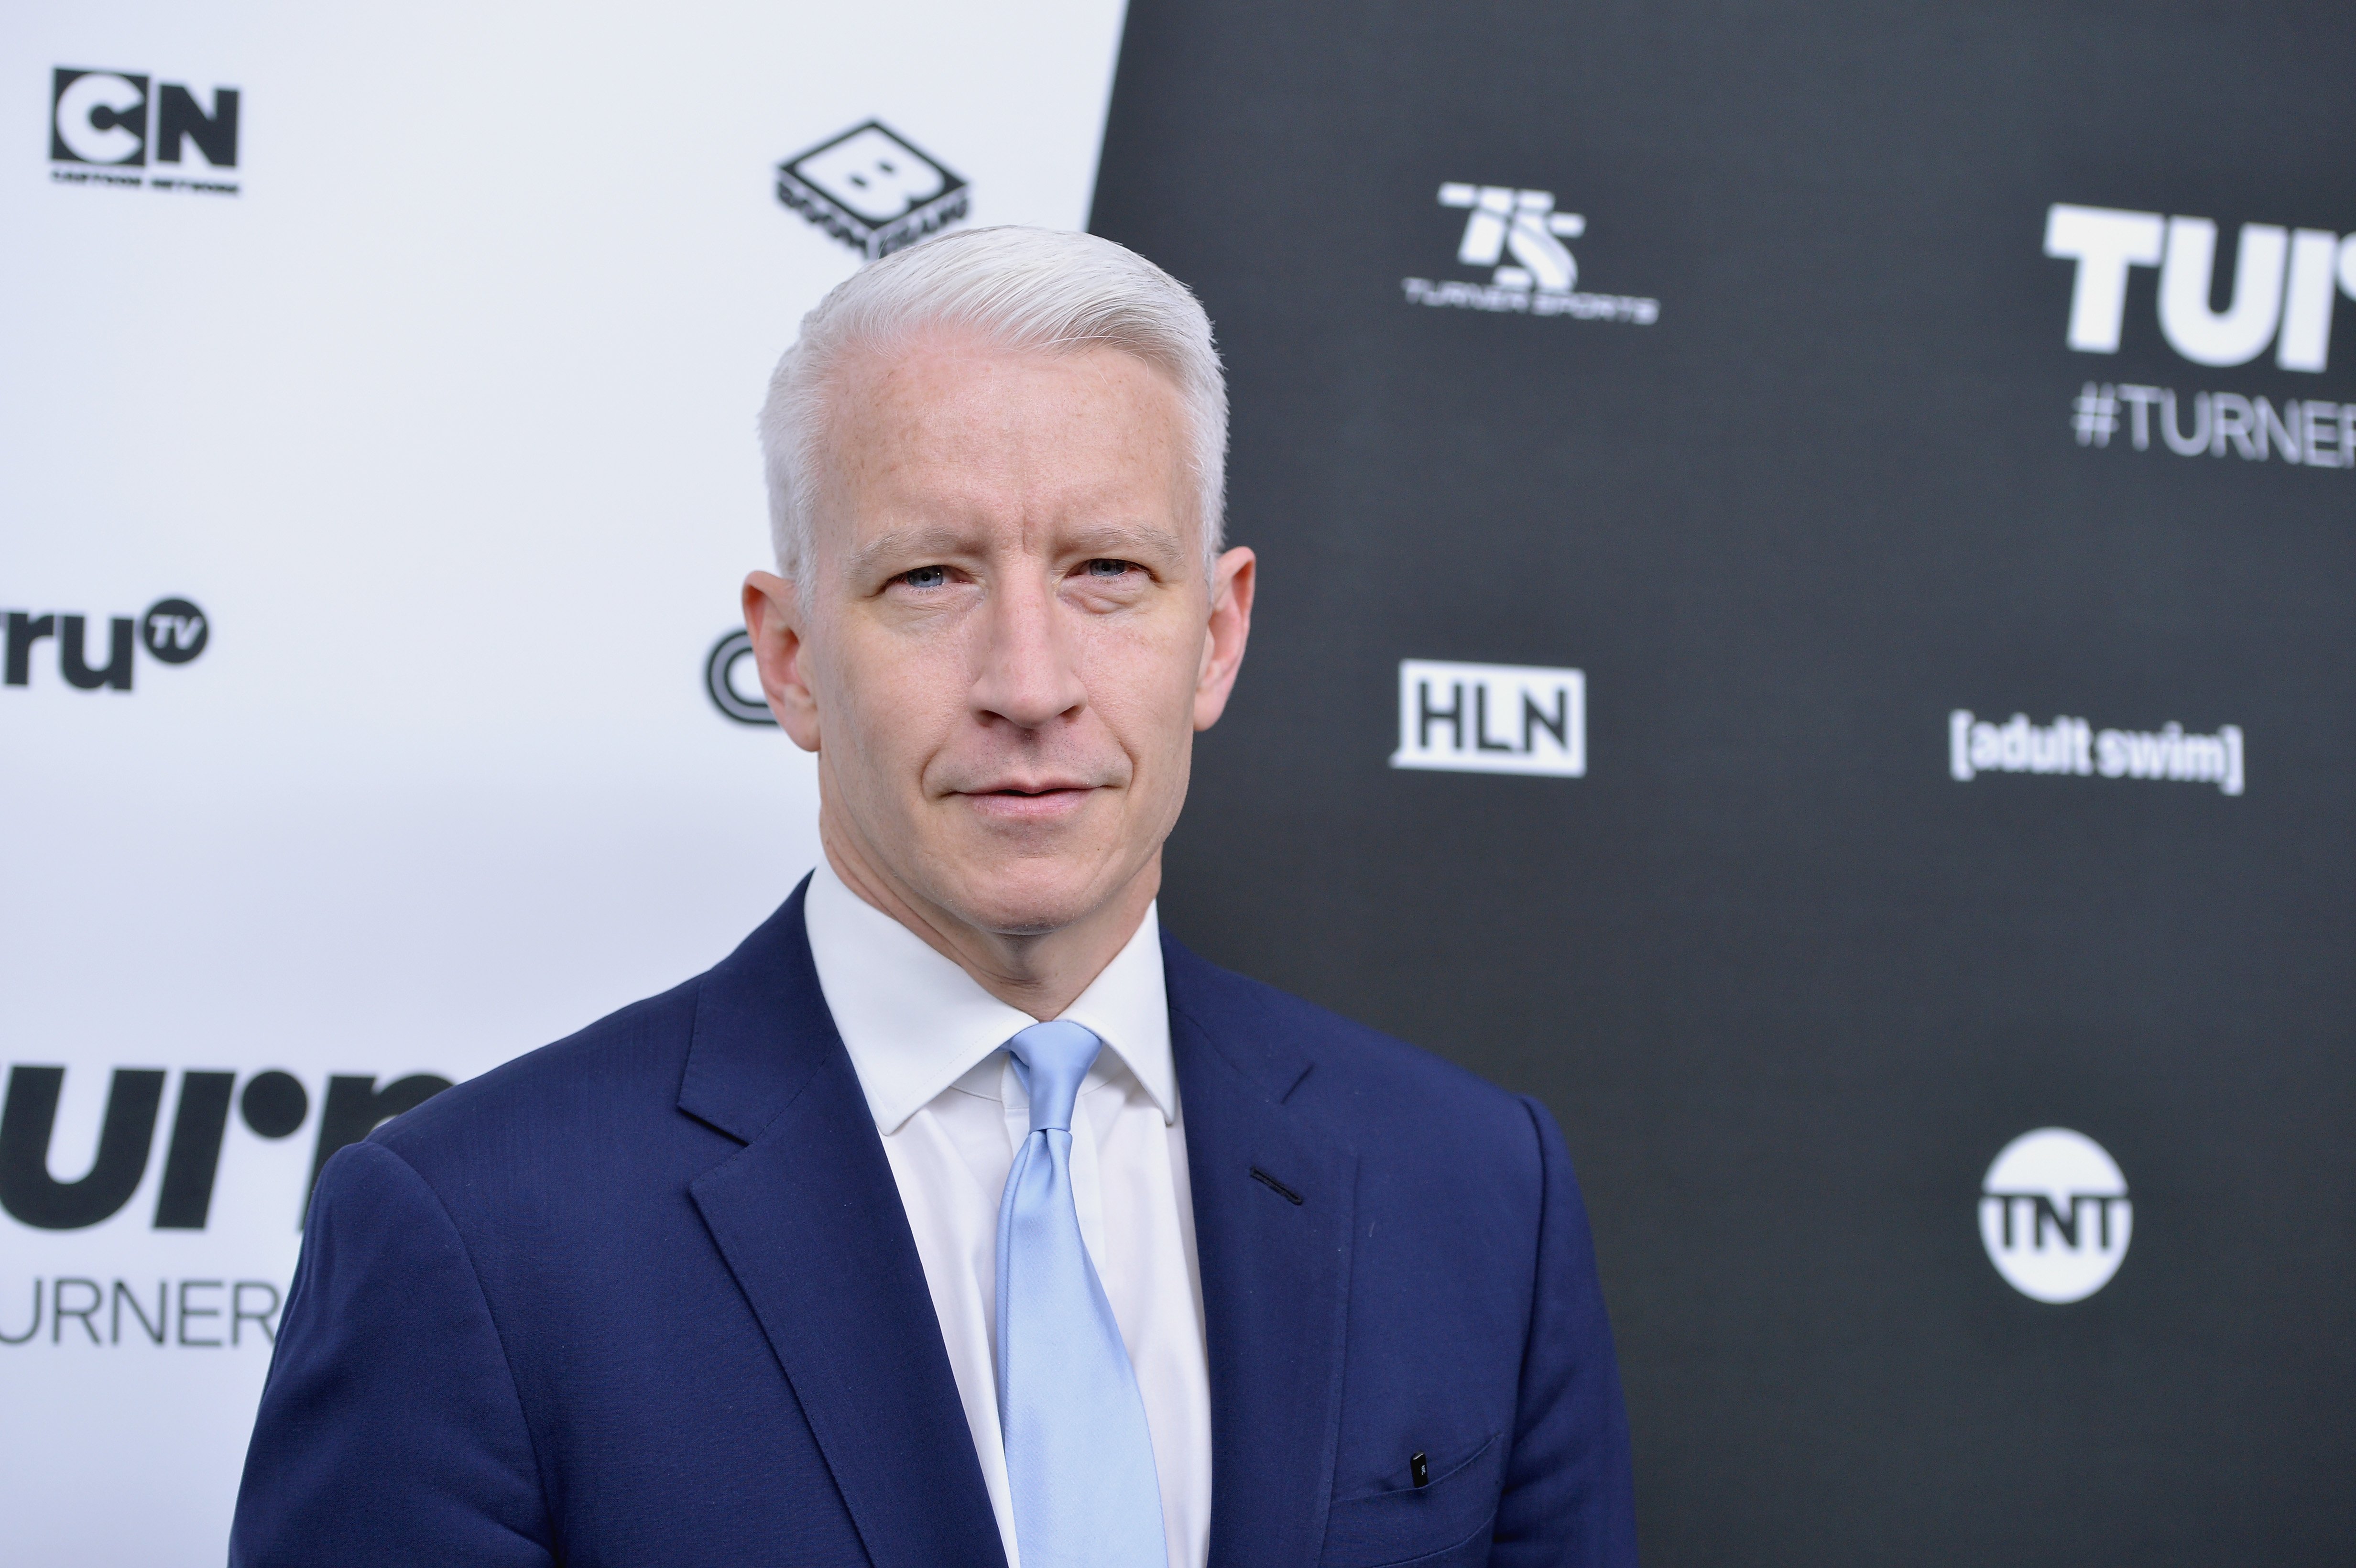 Anderson Cooper pictured at the Turner Upfront 2016 at Nick & Stef's Steakhouse, 2016, New York City. | Photo: Getty Images